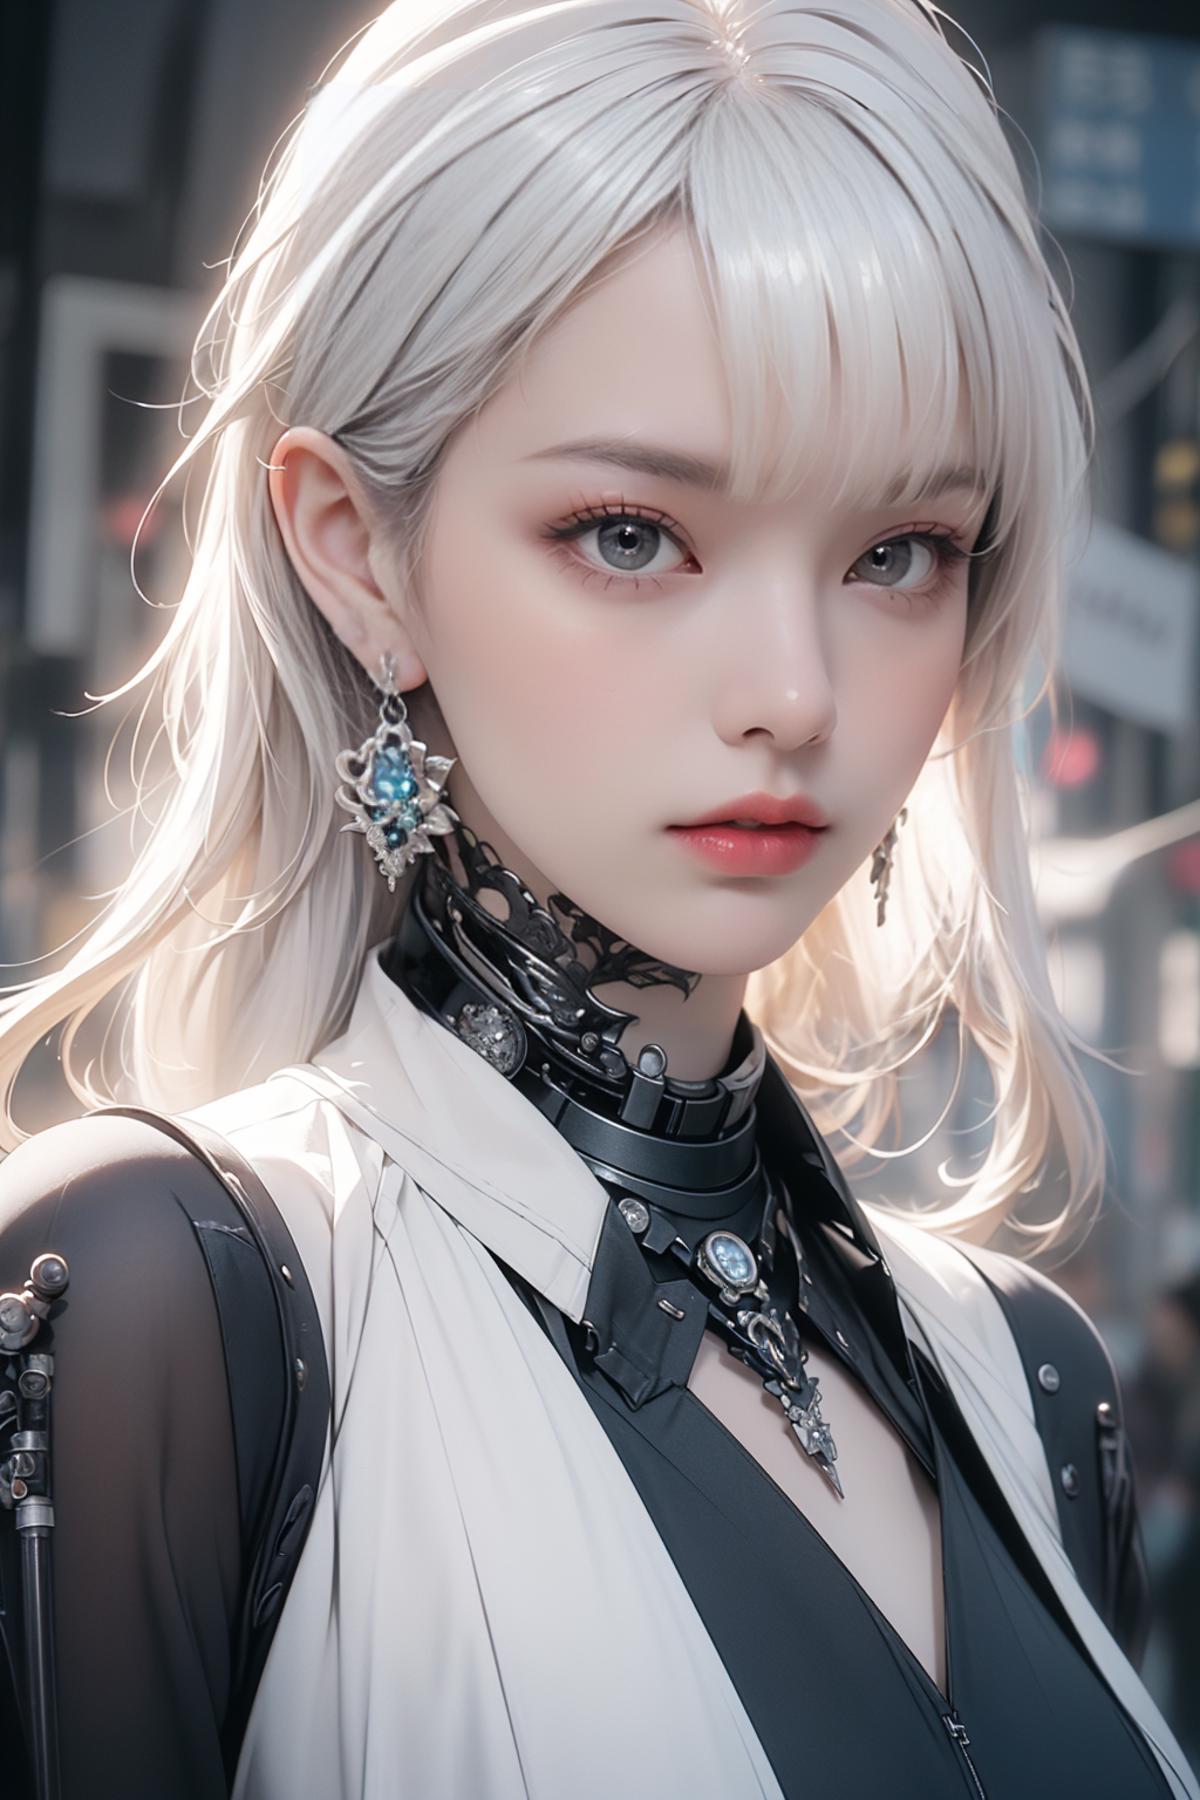 AI model image by Ng_SowhaT